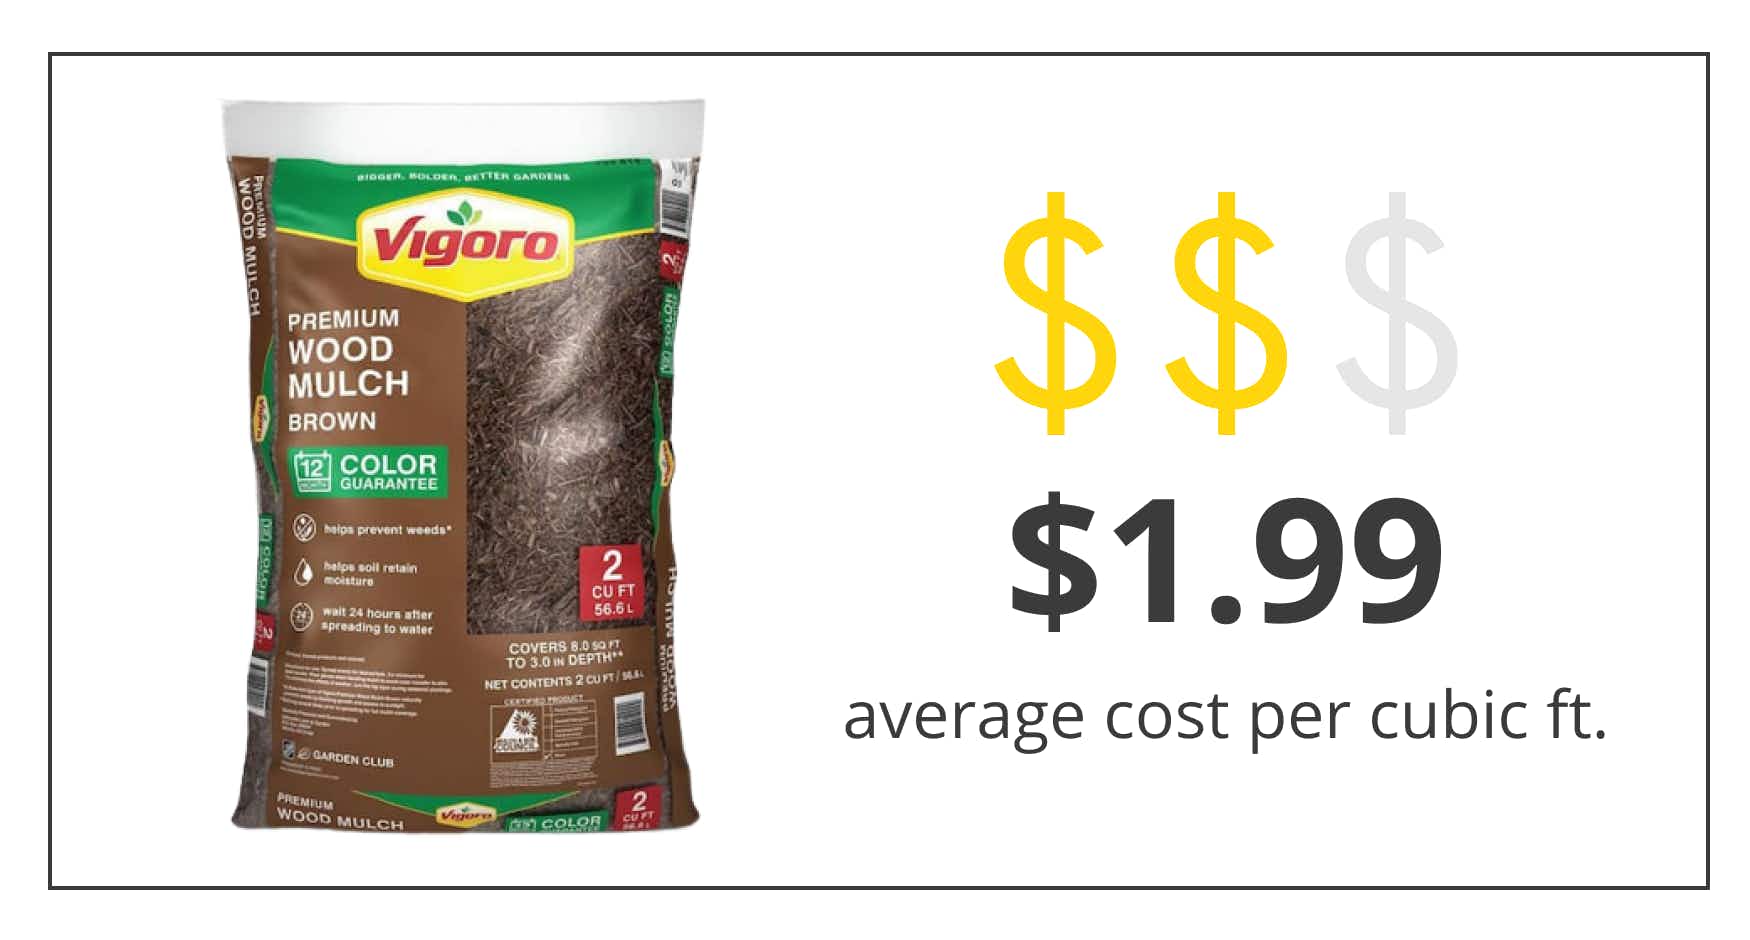 A graphic showing the average cost of a bag of Vigoro mulch is $1.99 per cubic foot